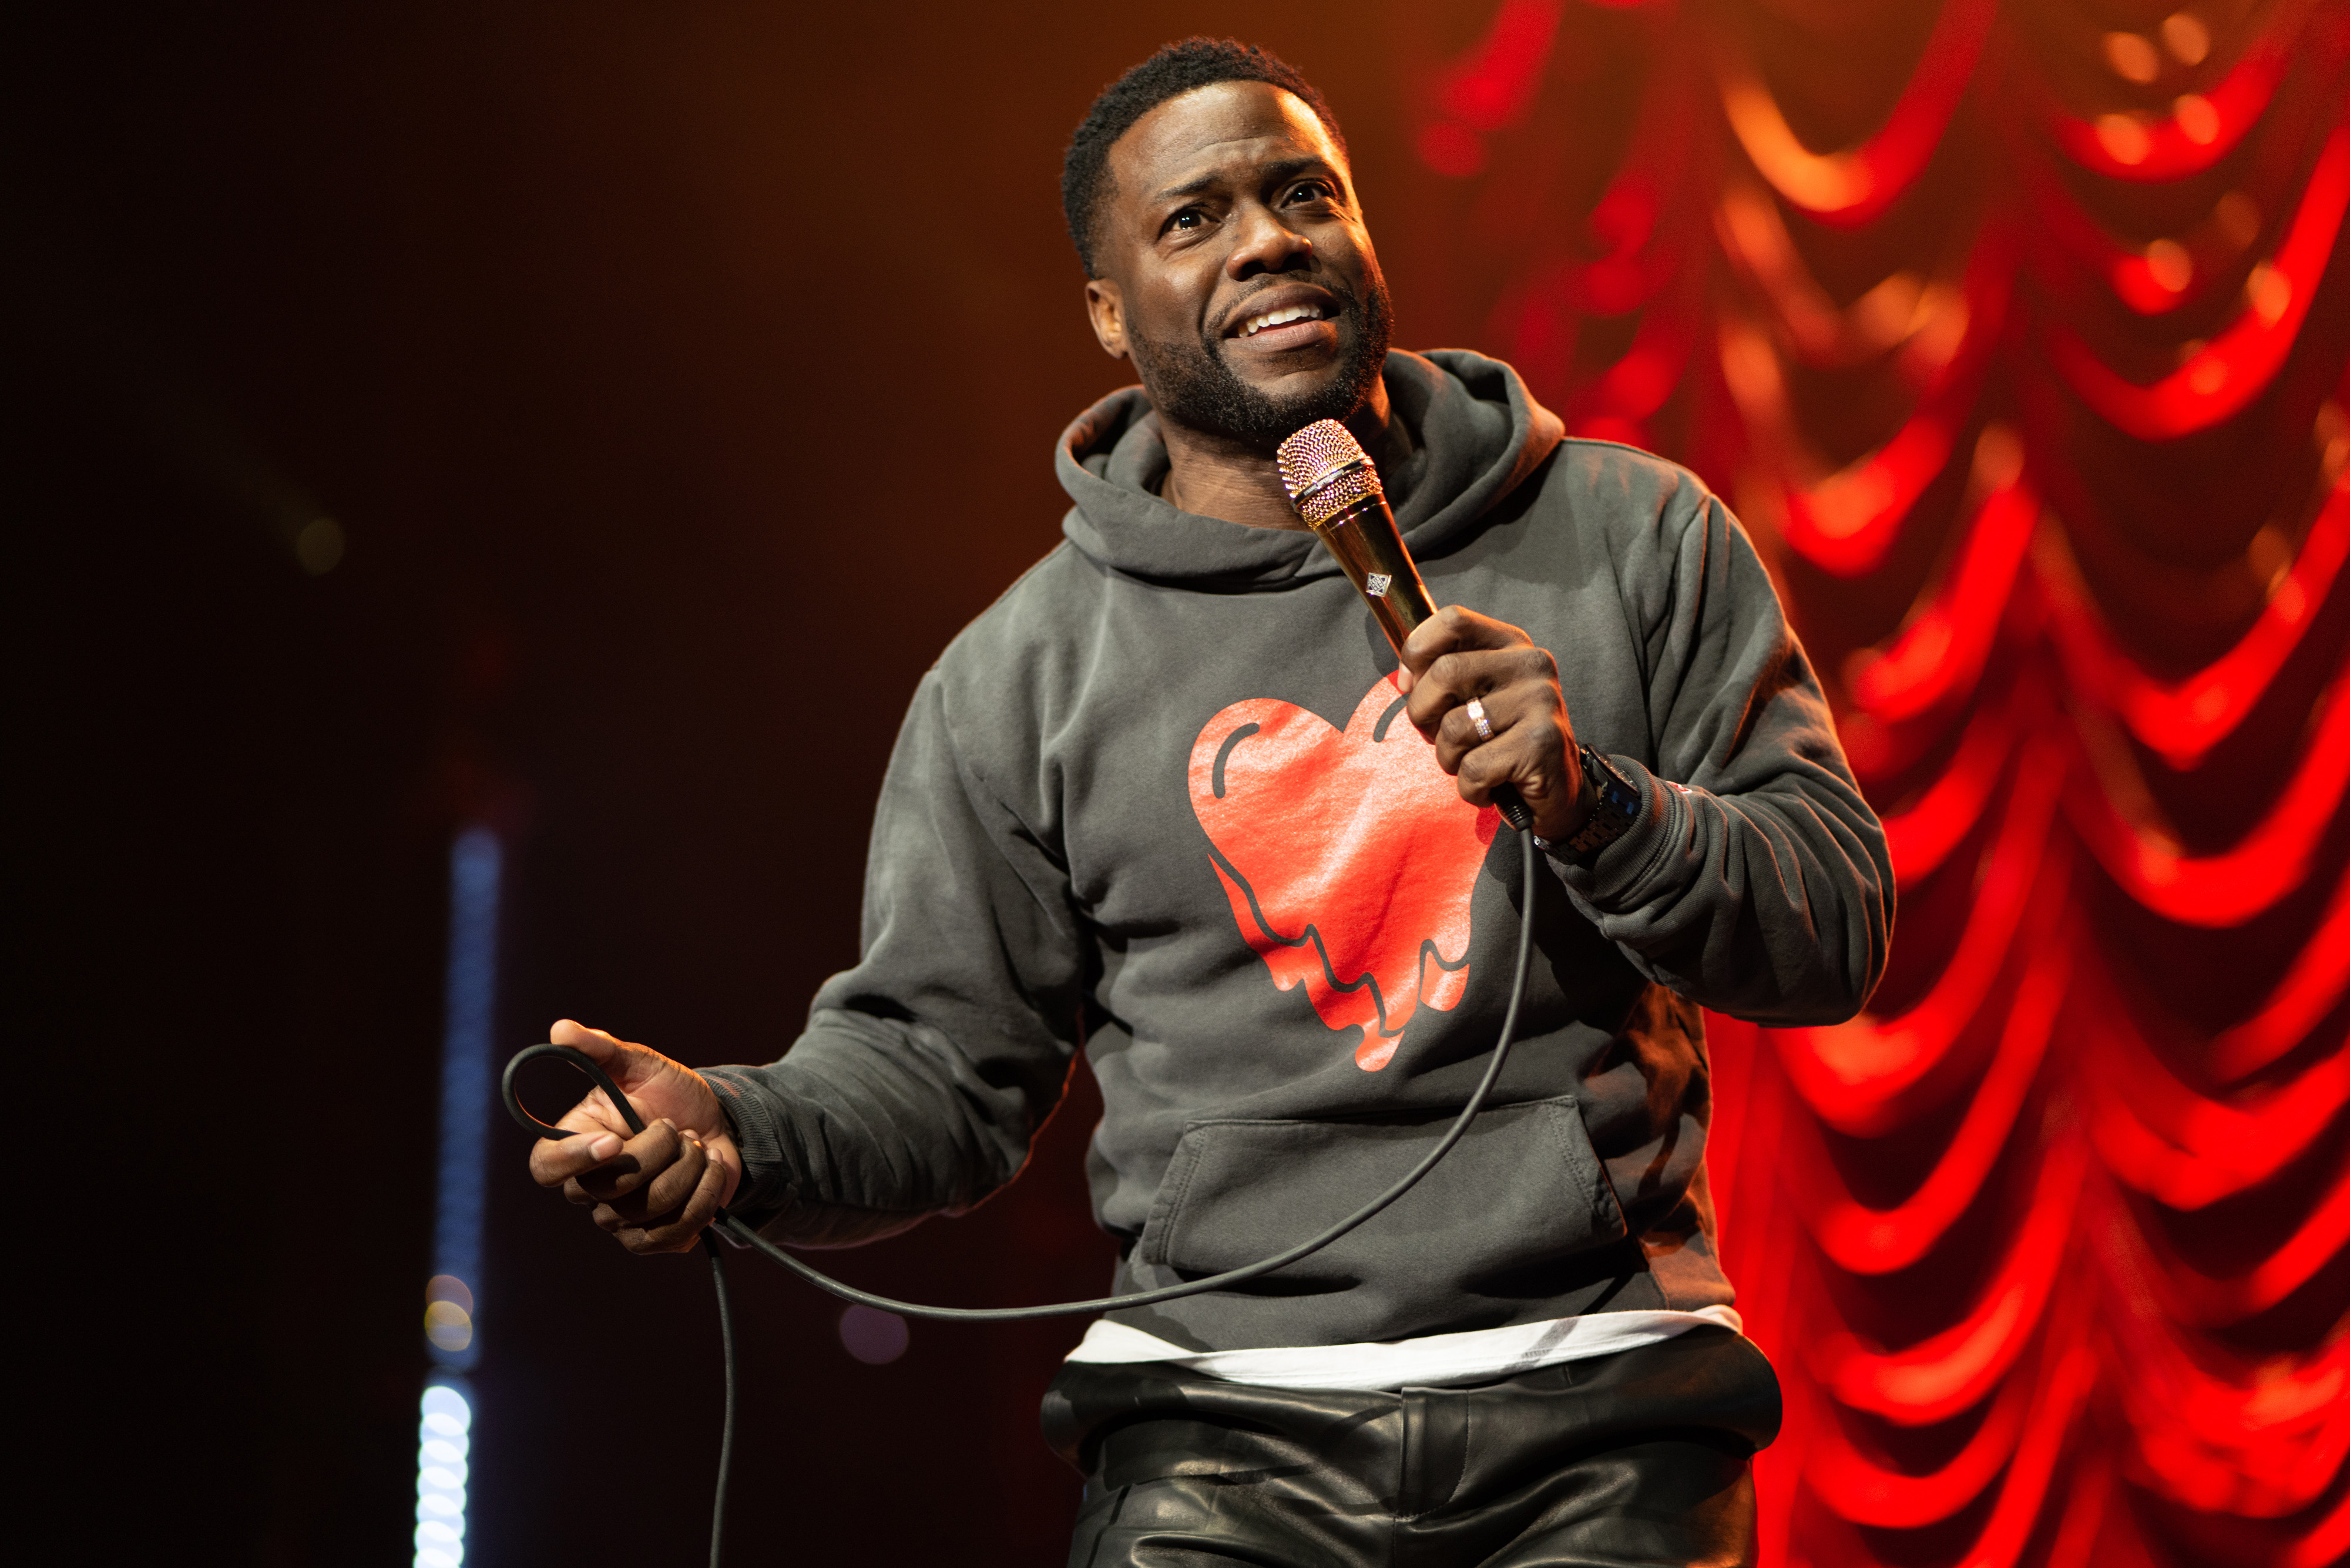 KEVIN HART AT NETFLIX IS A JOKE: THE FESTIVAL Photo credit: Kevin Kwan / courtesy of Netflix